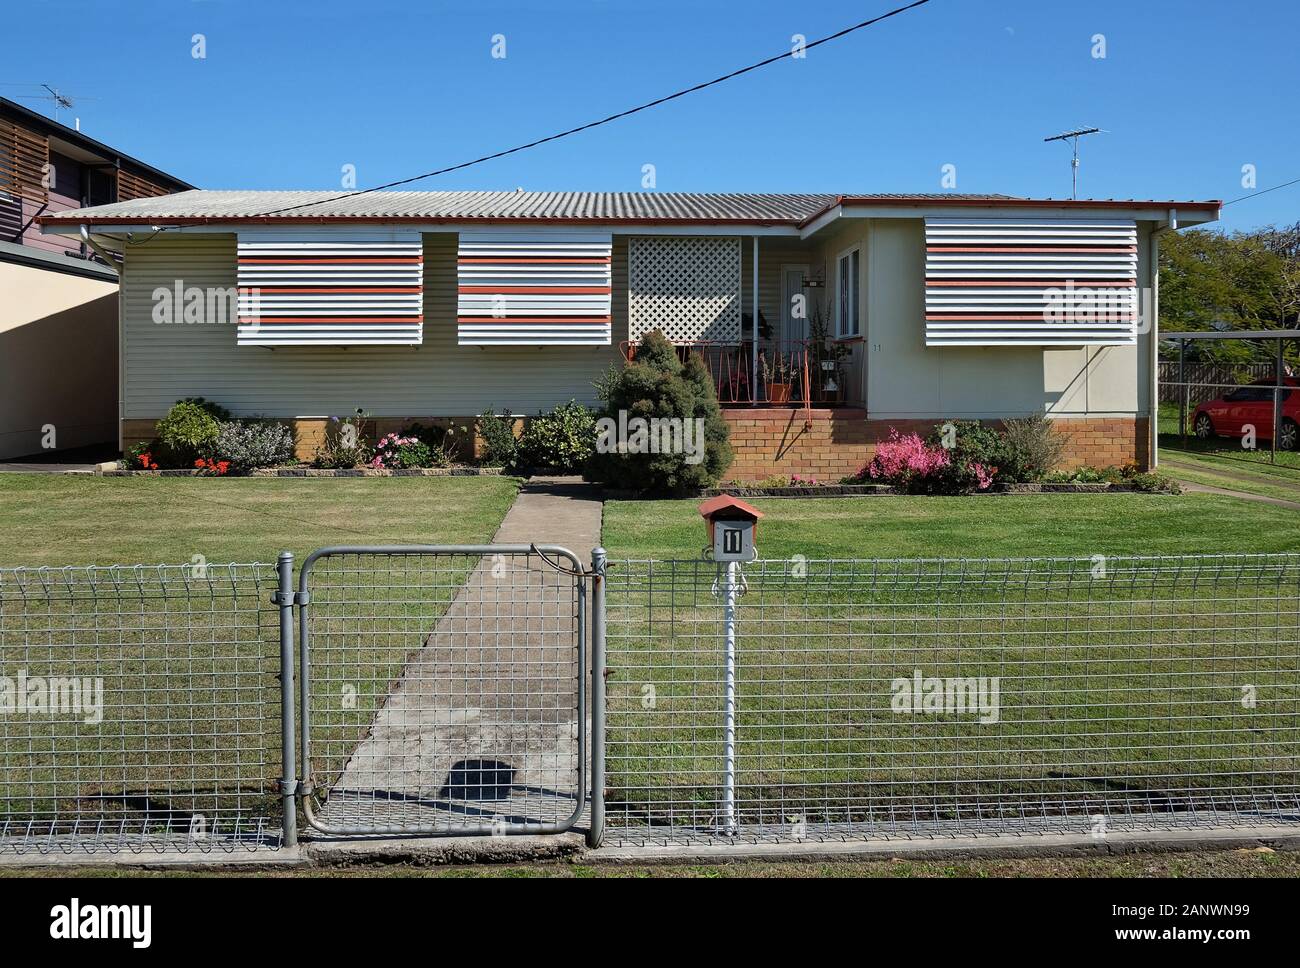 Low set 1960s mid century modern inspired house in Cannon Hill . Green lawn, wire fence, grass lawn, weatherboard, fibro & aluminium louvre awnings Stock Photo